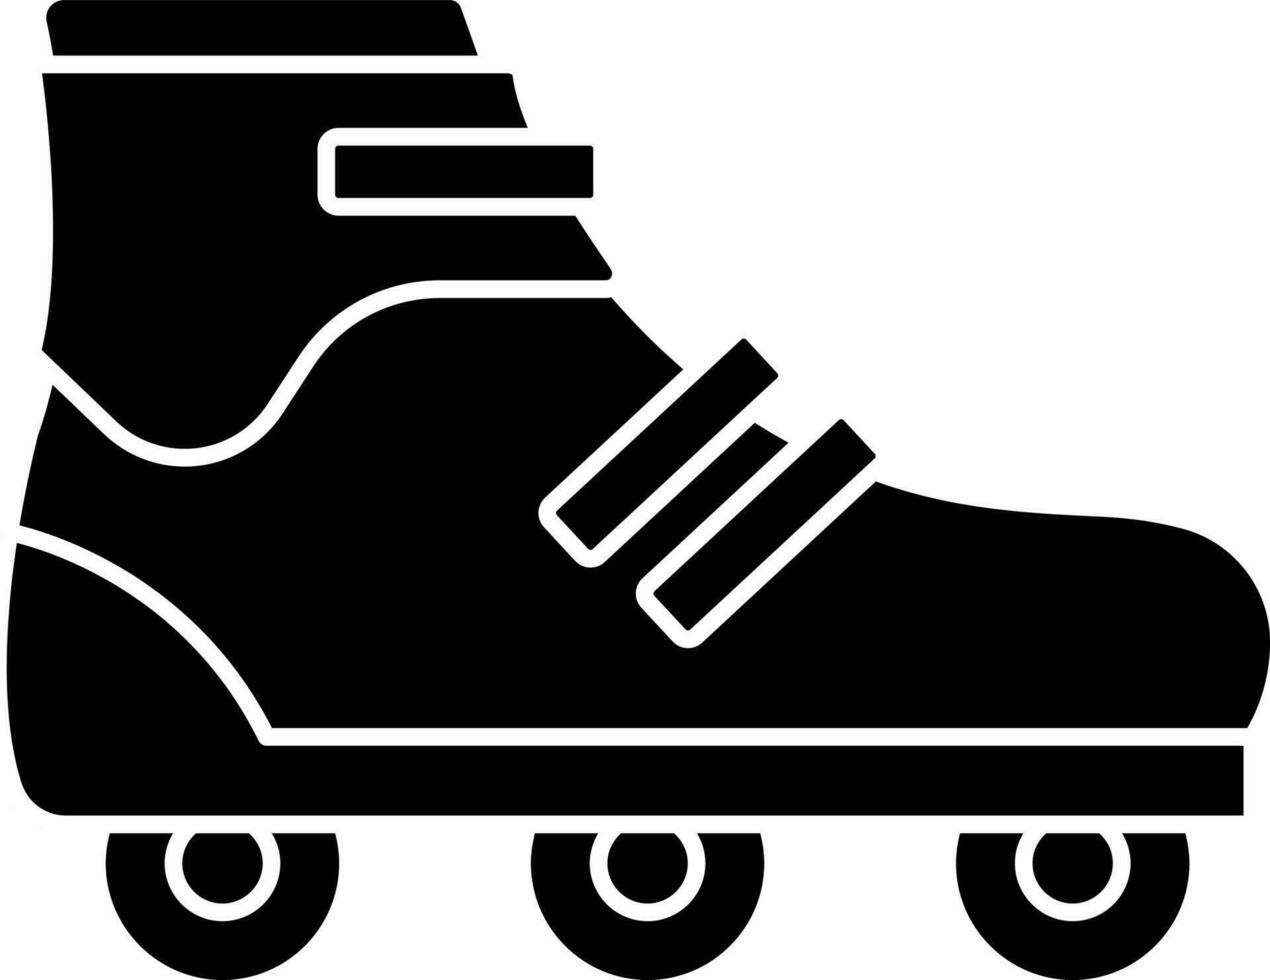 Isolated Roller Skate Icon In black and white Color. vector